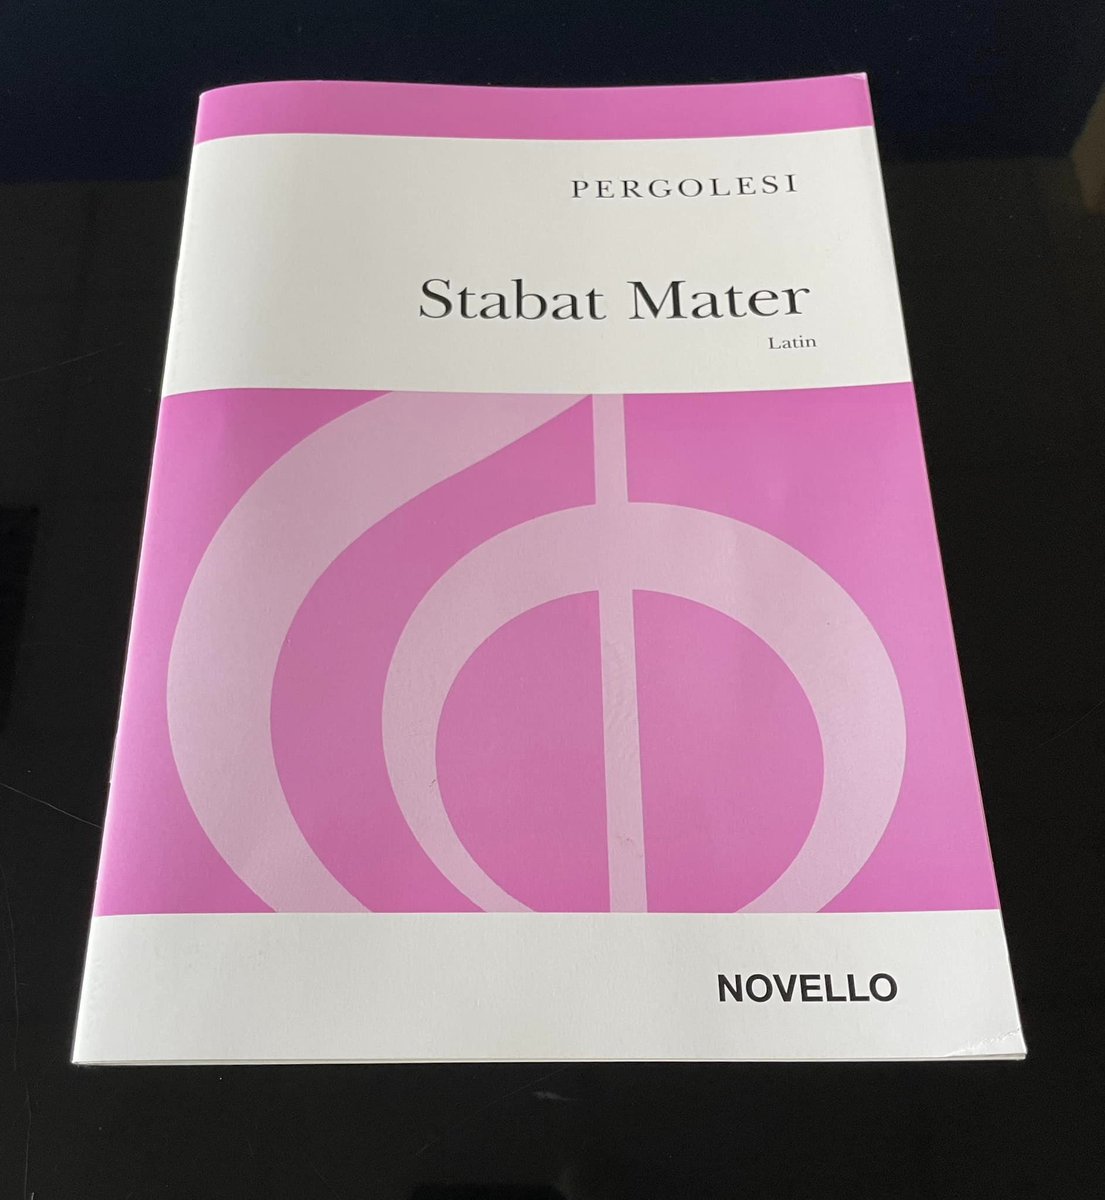 All are warmly welcome to join us on #Sunday at 6:30pm for a #Choral #Meditation when our senior #choristers and members of our Youth Choir will sing #Pergolesi’s Stabat Mater 🎶 #peterborough #holyweek #churchmusic #cathedralchoir